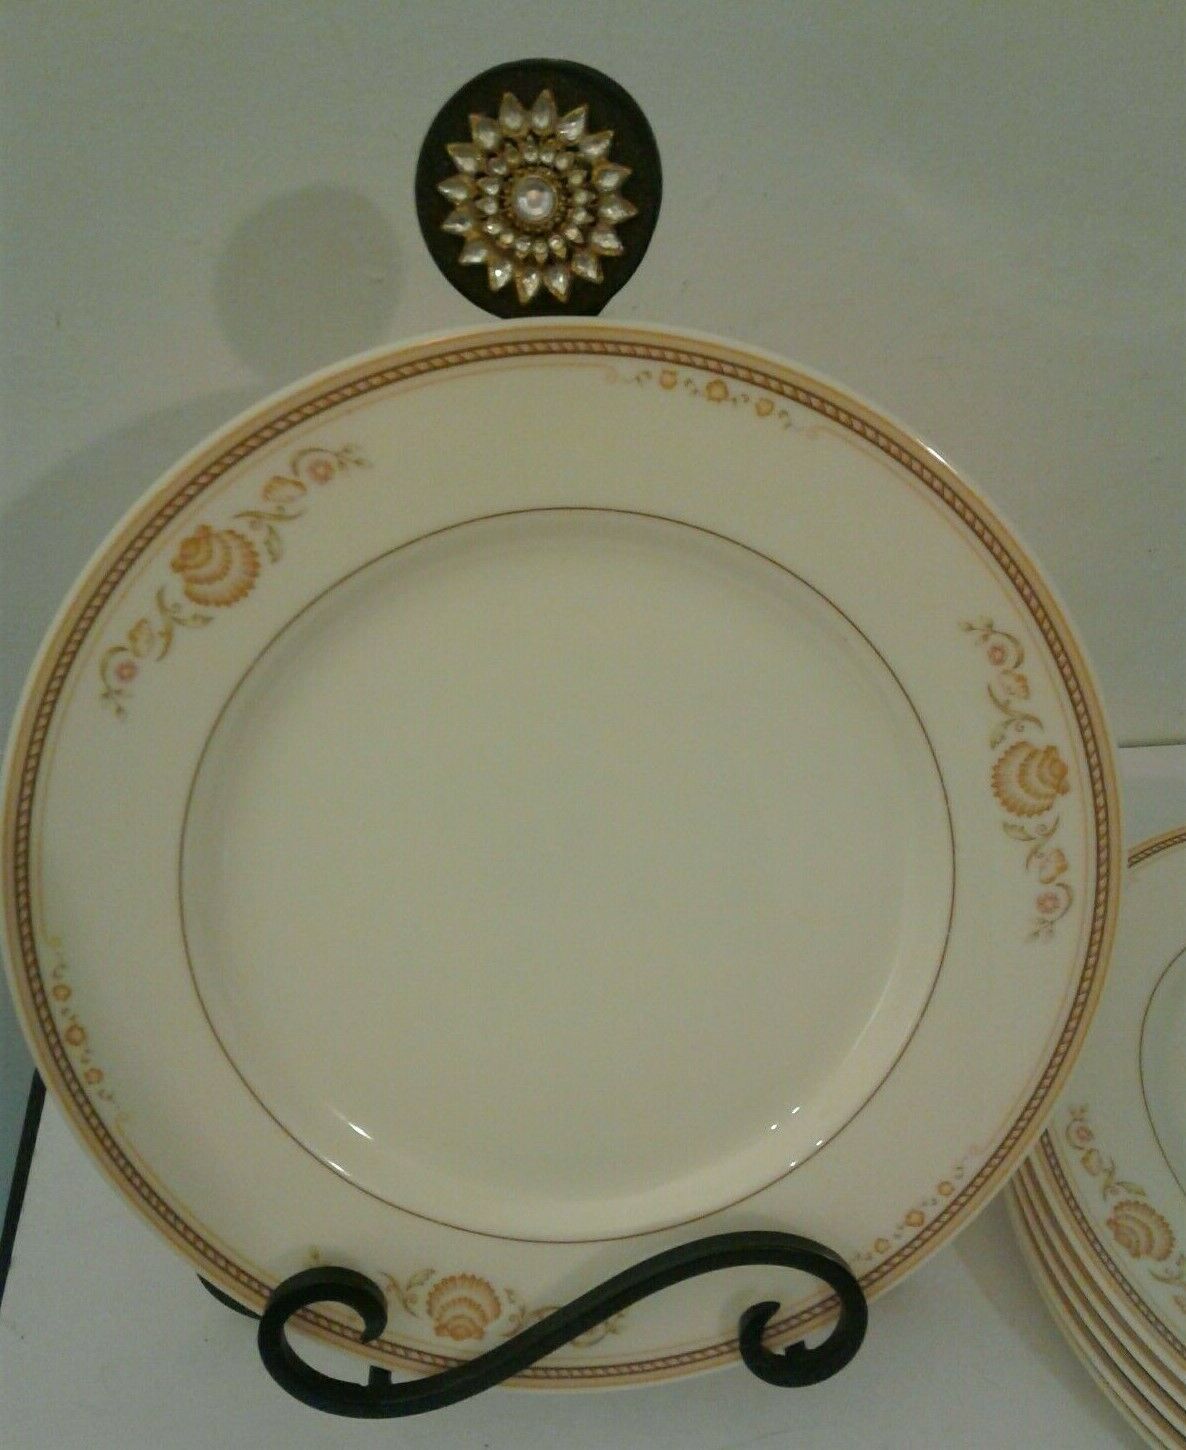 Gorham Town & Country Newport Dinner Plate(s) China Sea Shell Design